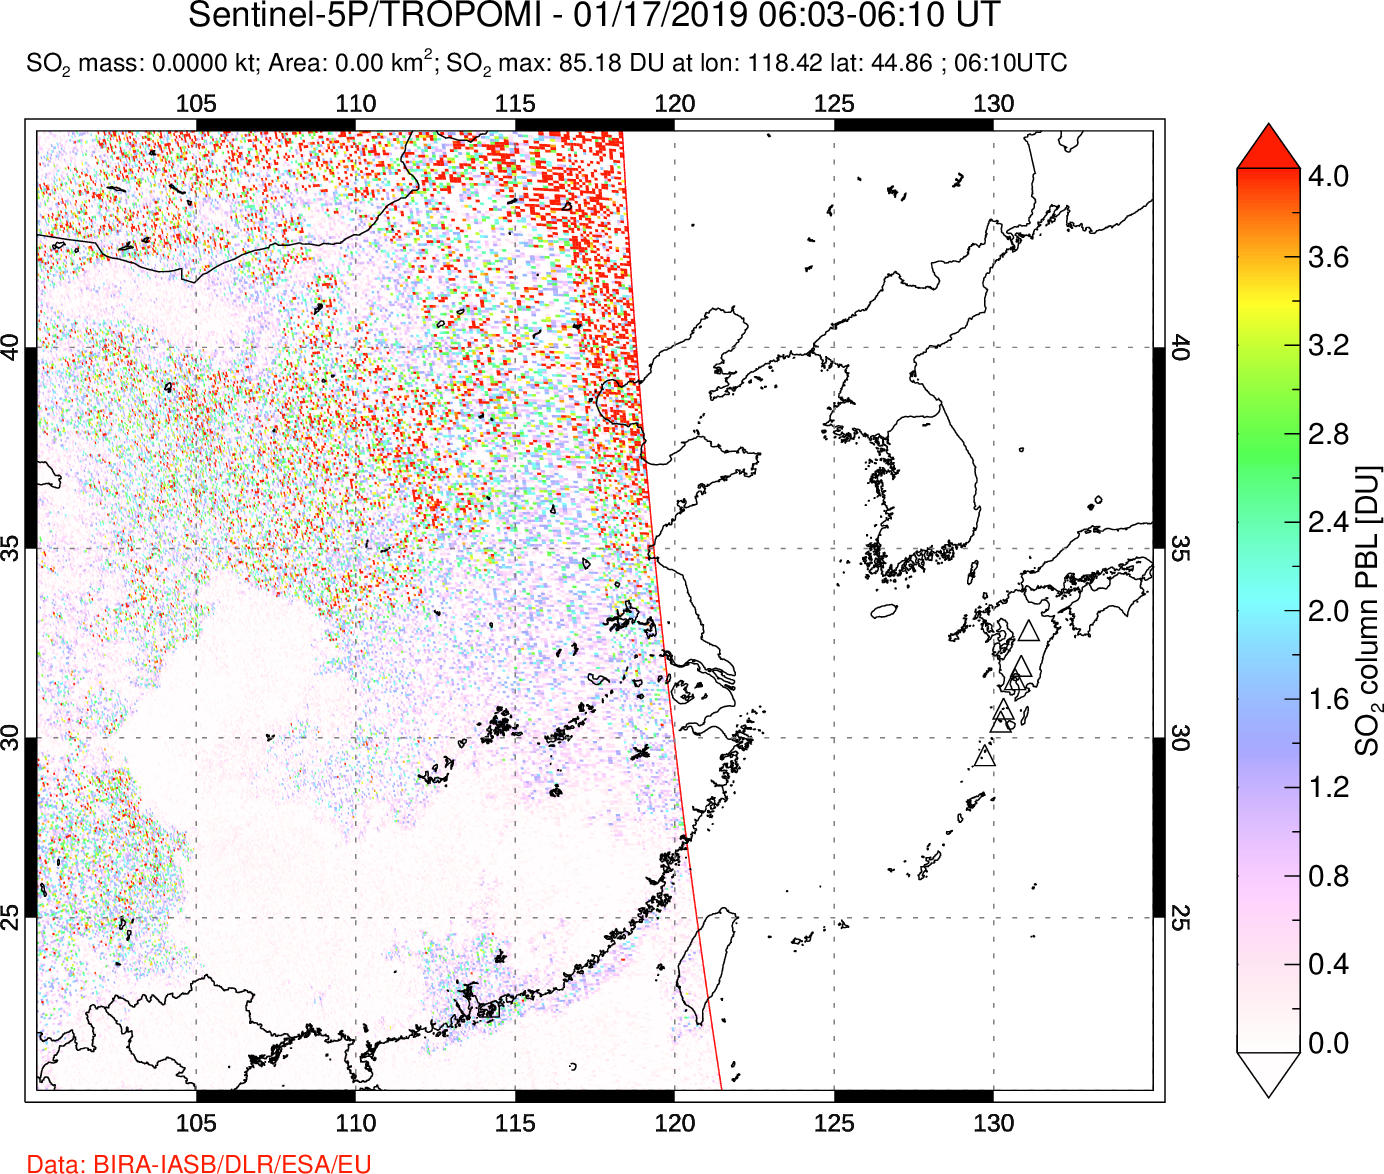 A sulfur dioxide image over Eastern China on Jan 17, 2019.